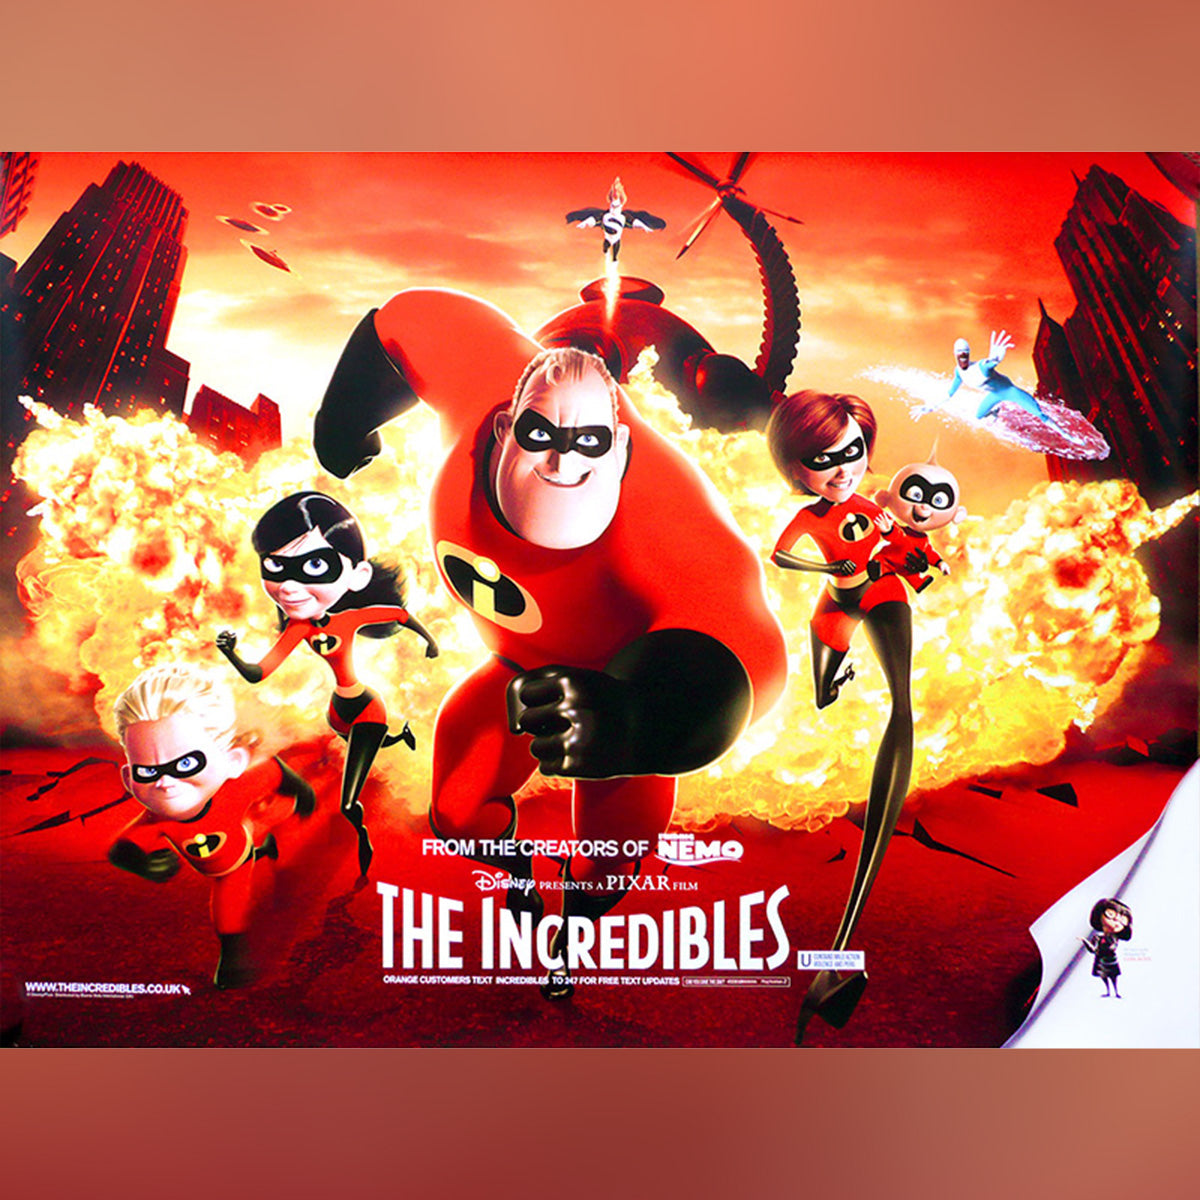 Original Movie Poster of Incredibles, The (2004)